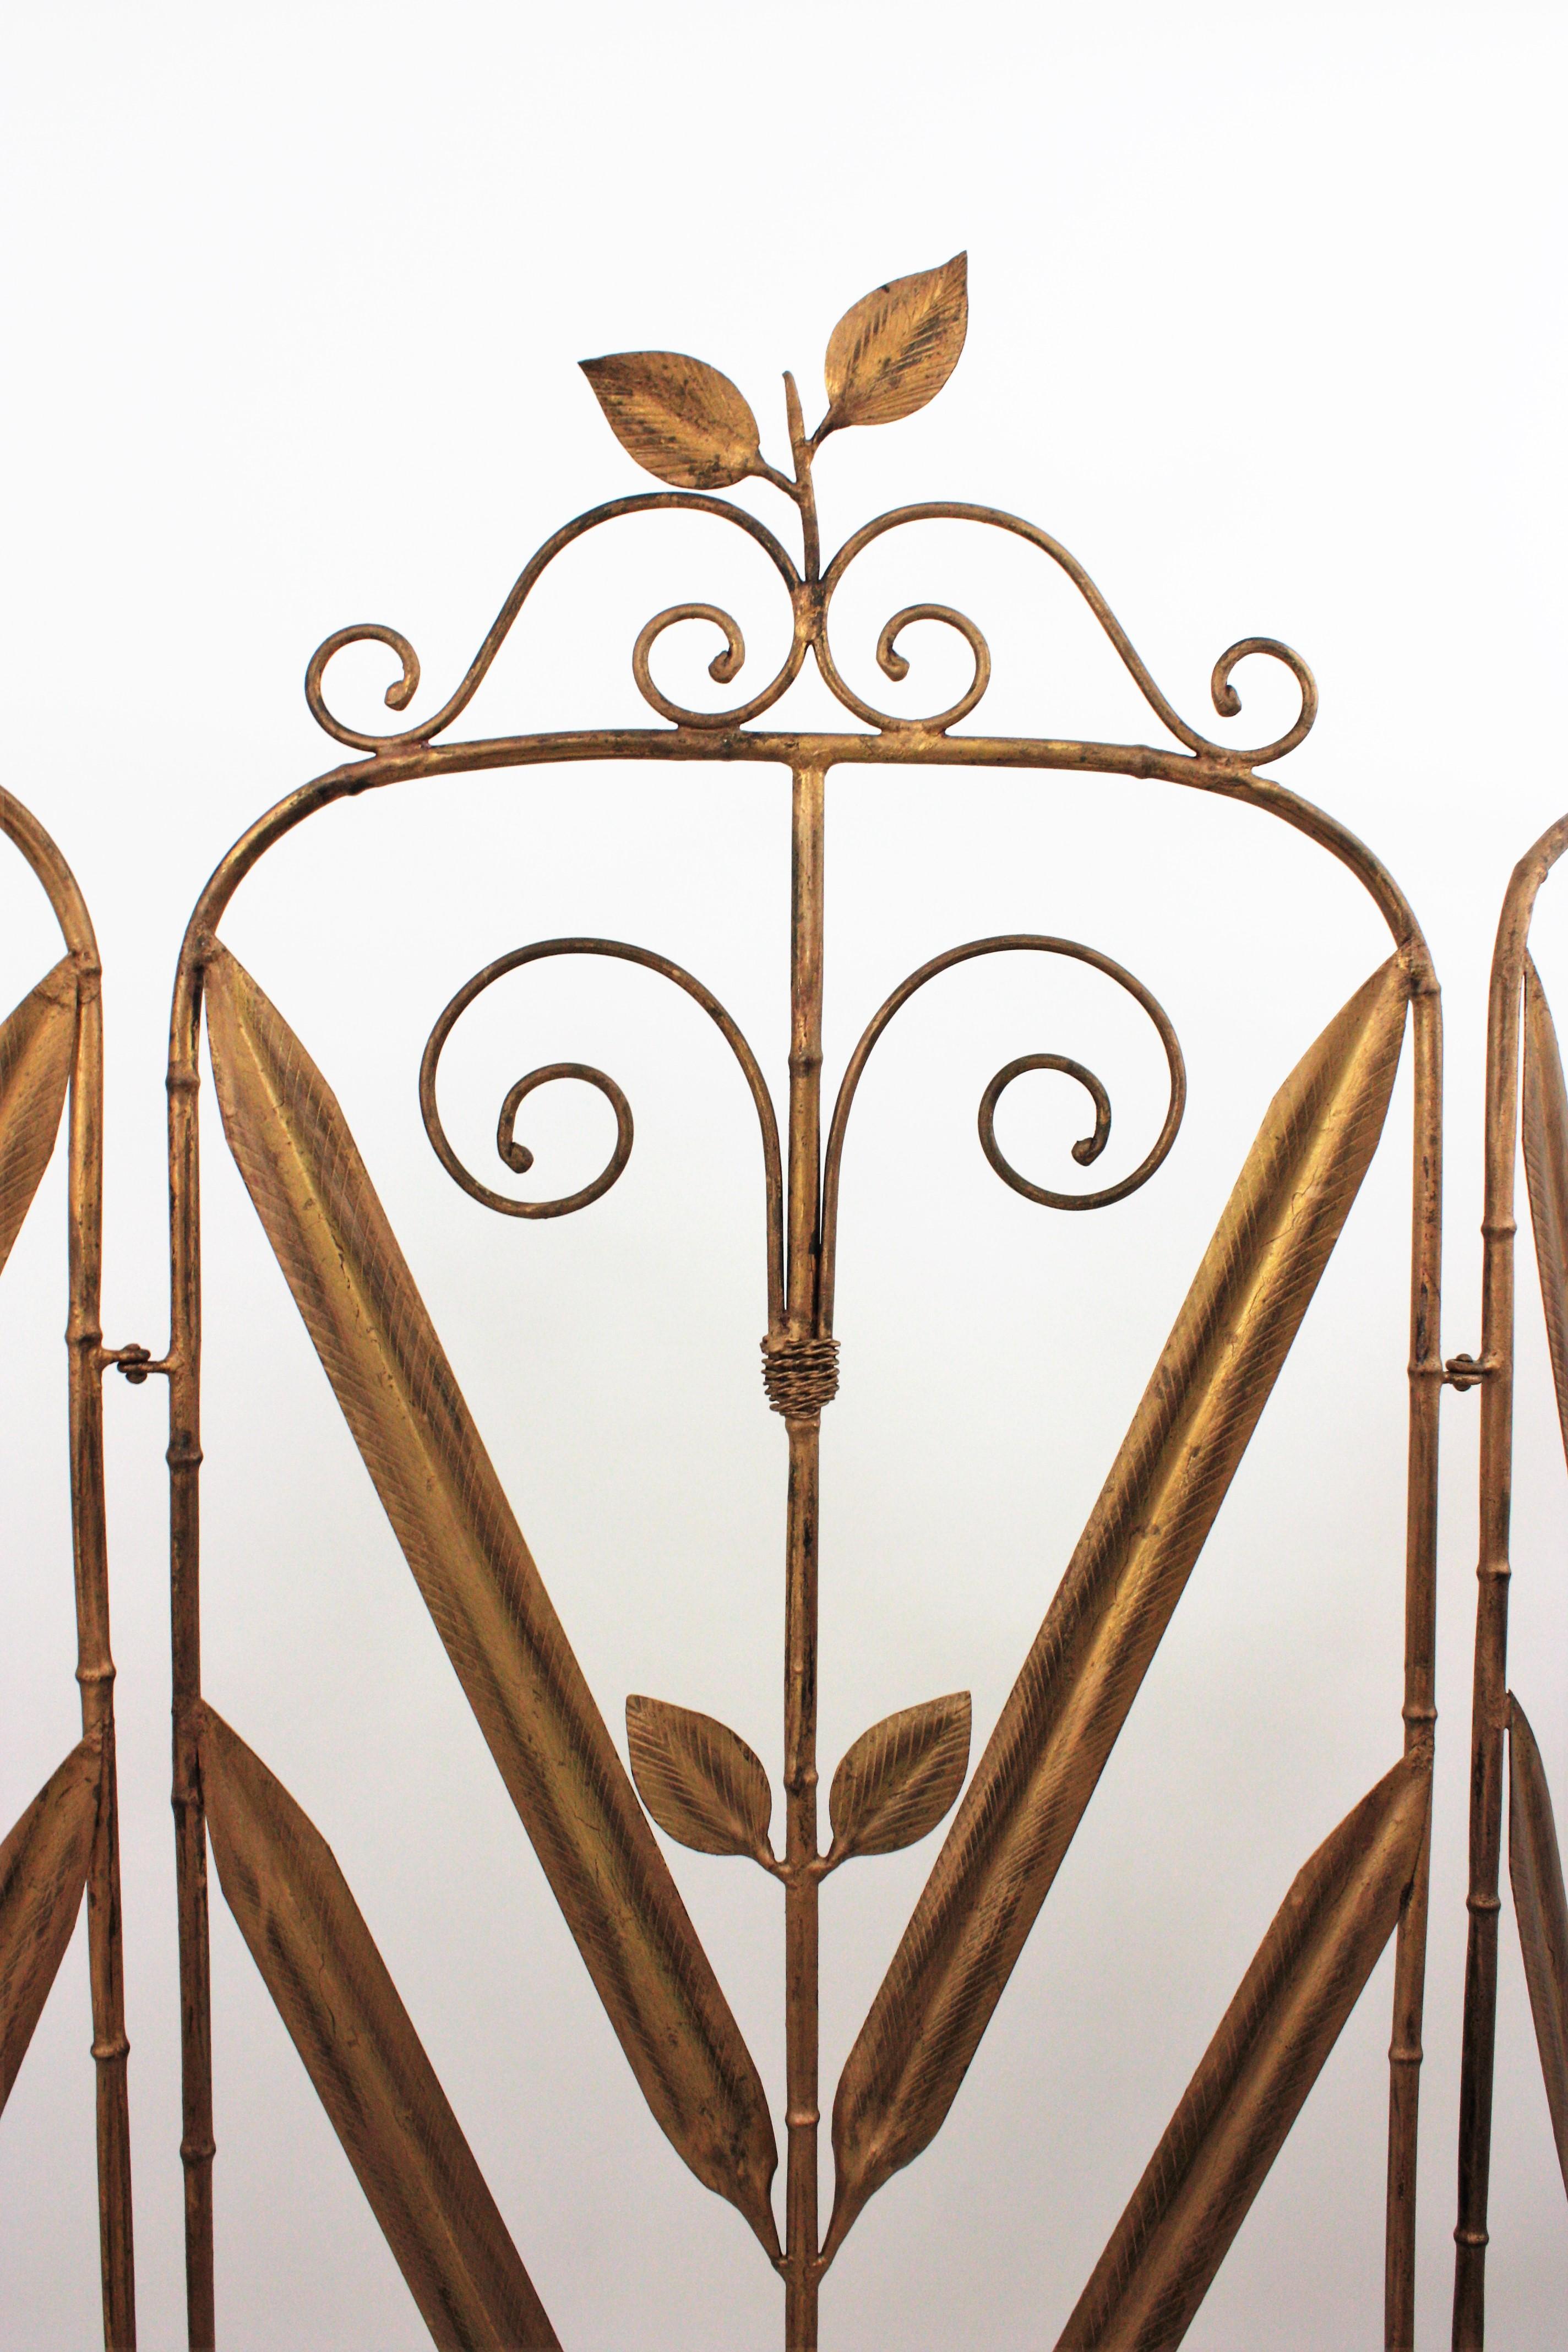 20th Century 1950s Spanish Folding Screen / Room Divider in Gilt Metal For Sale